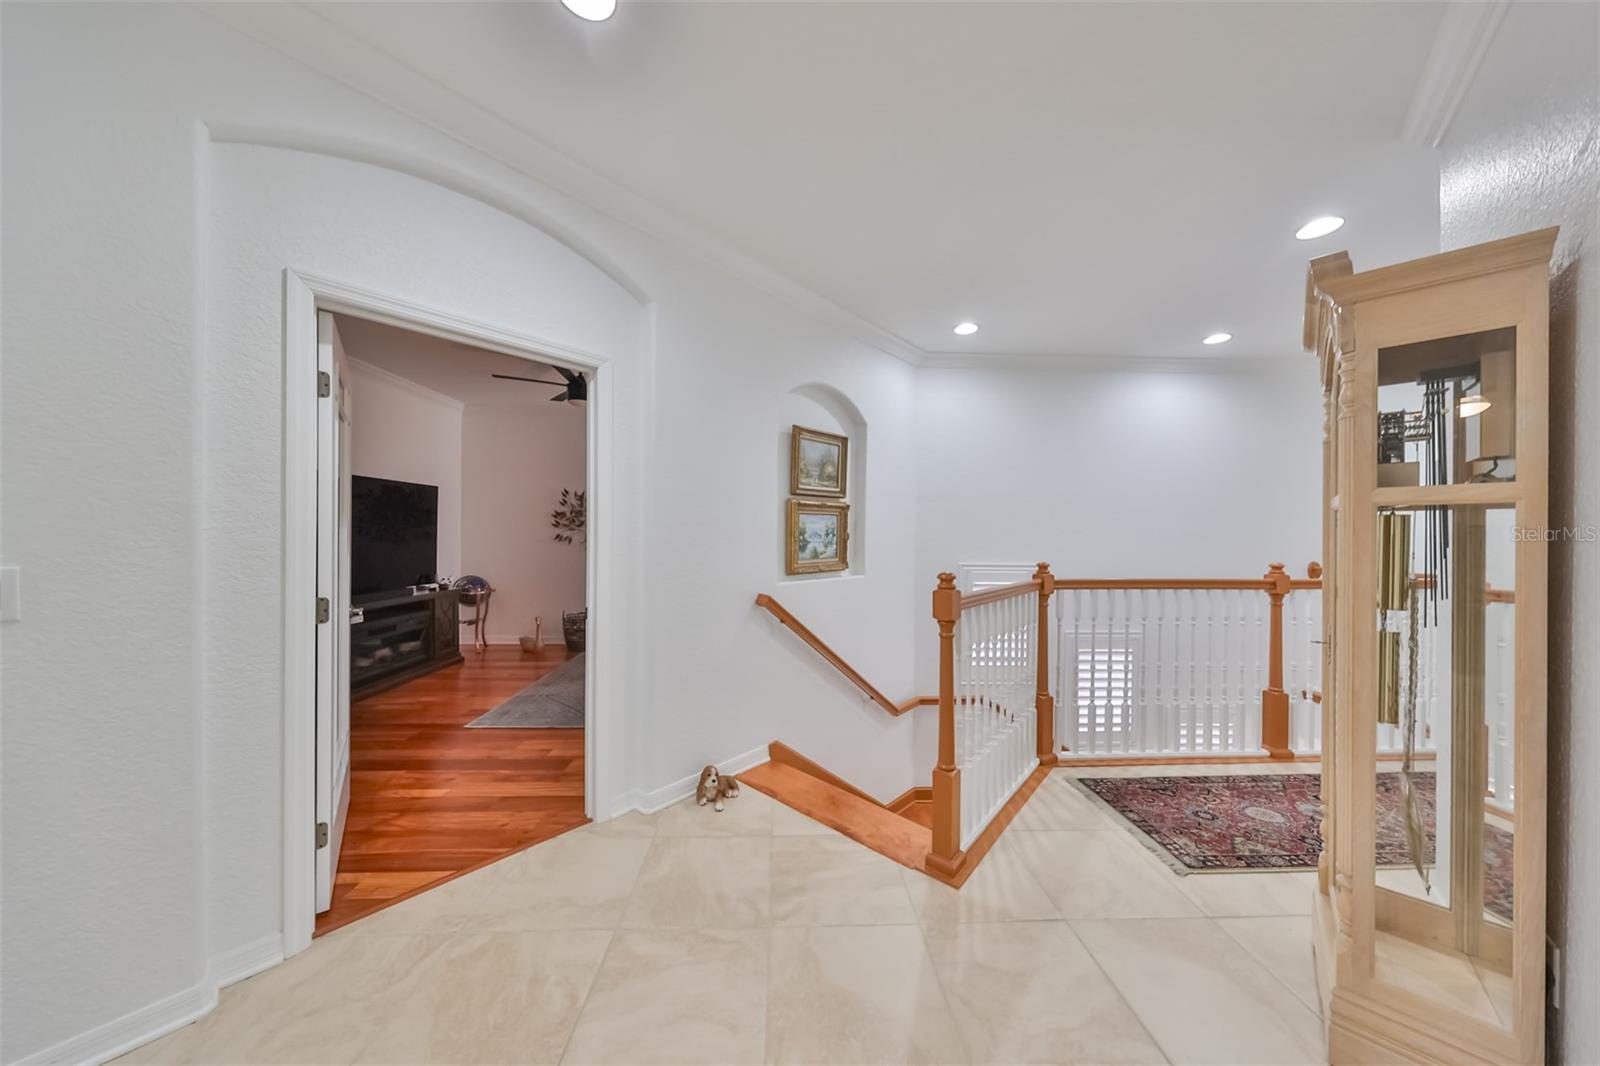 The landing at the top of the stairs is spacious, bright and open.  It is the intersection for entrances into the main living area, den/office, the elevator or the secondary bedrooms and bath.